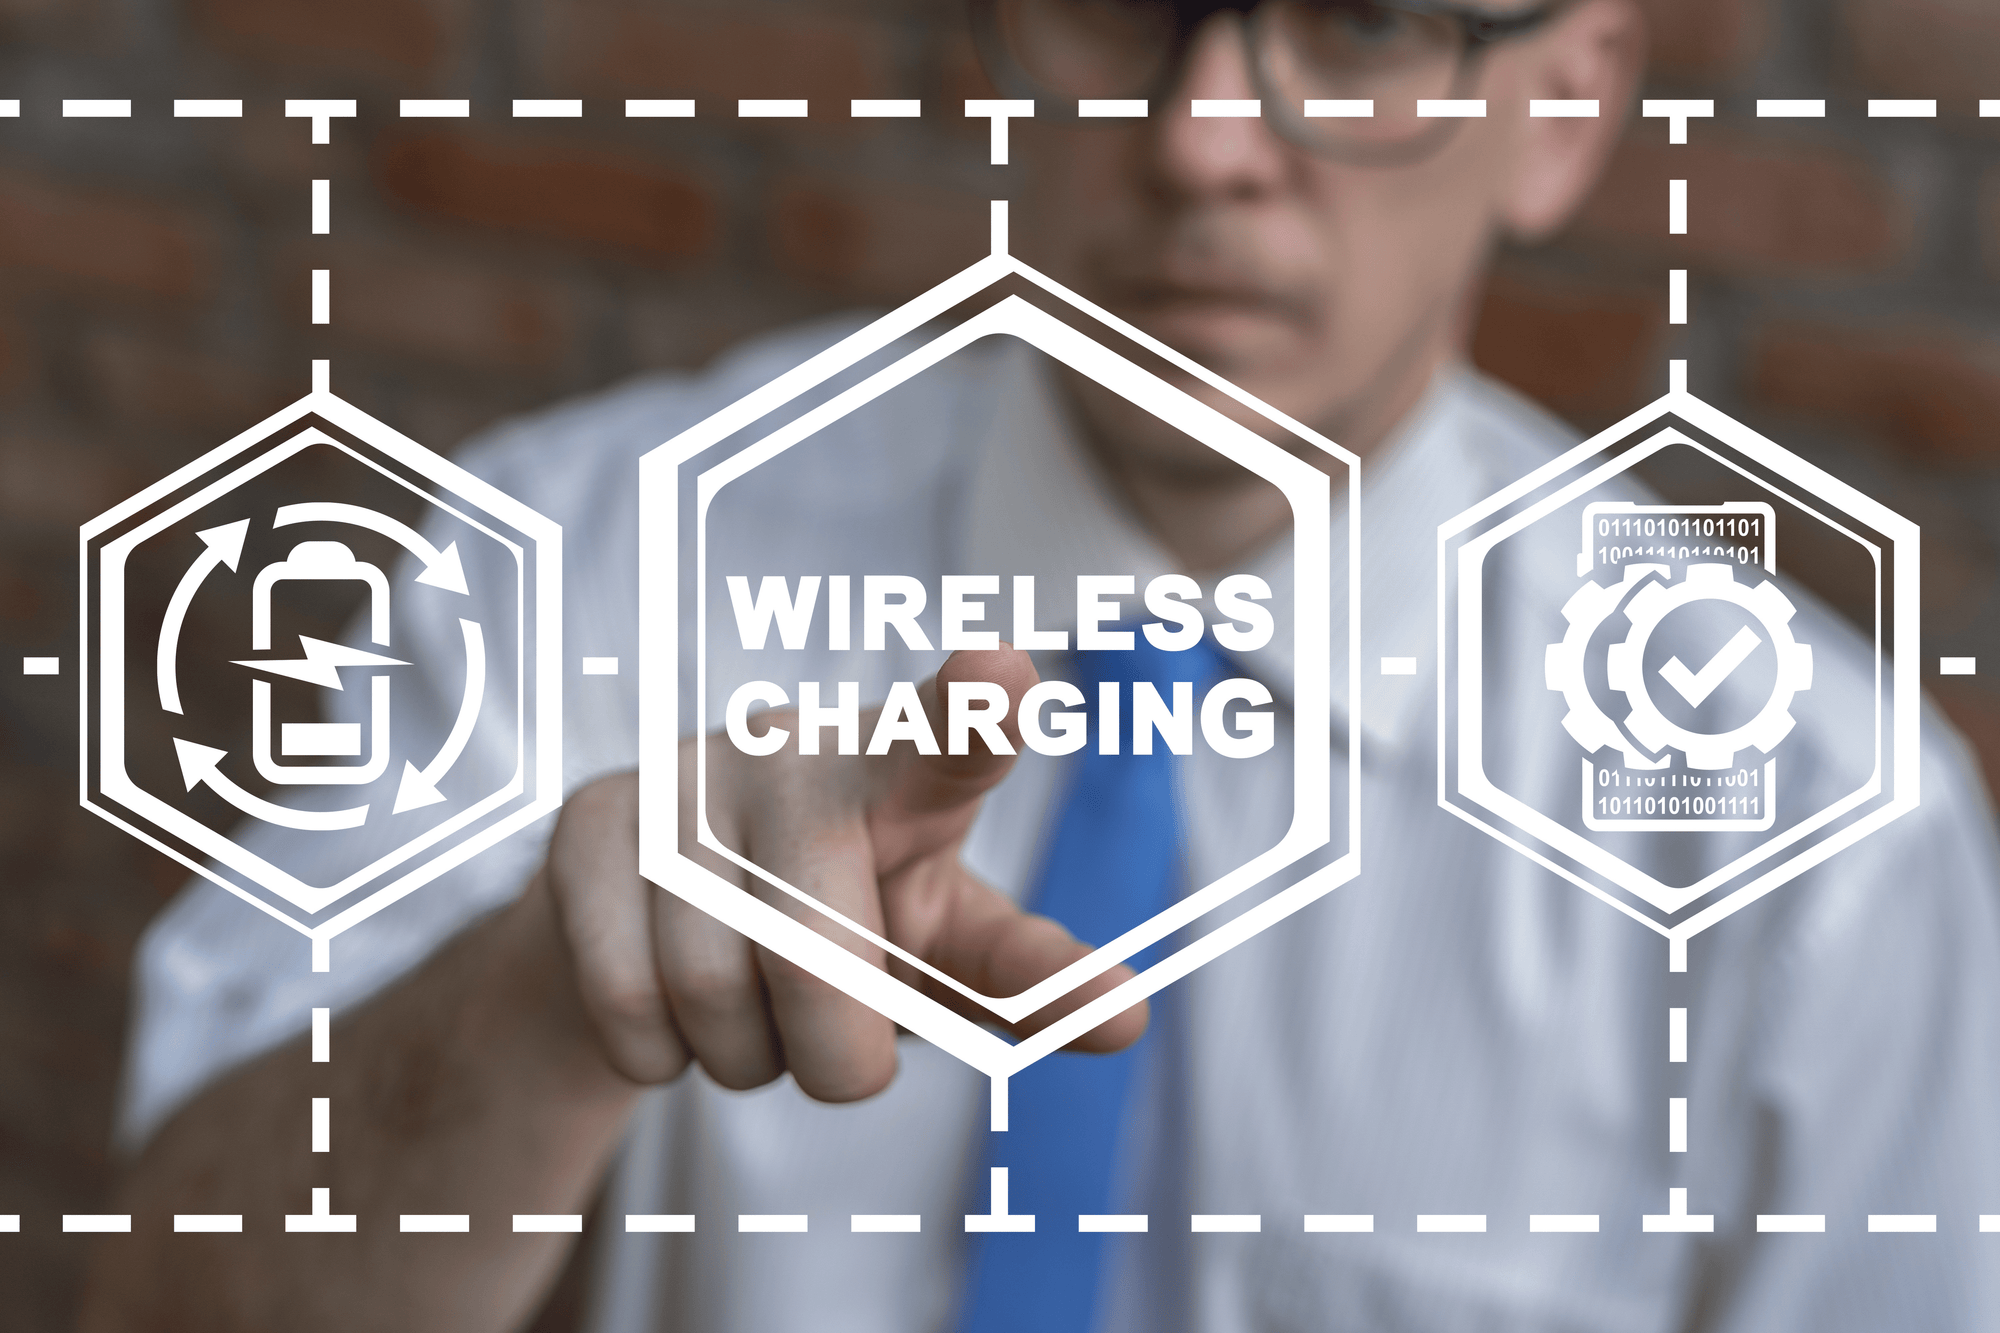 Qi Based Wireless Chargers - How Far Can Technology Go?